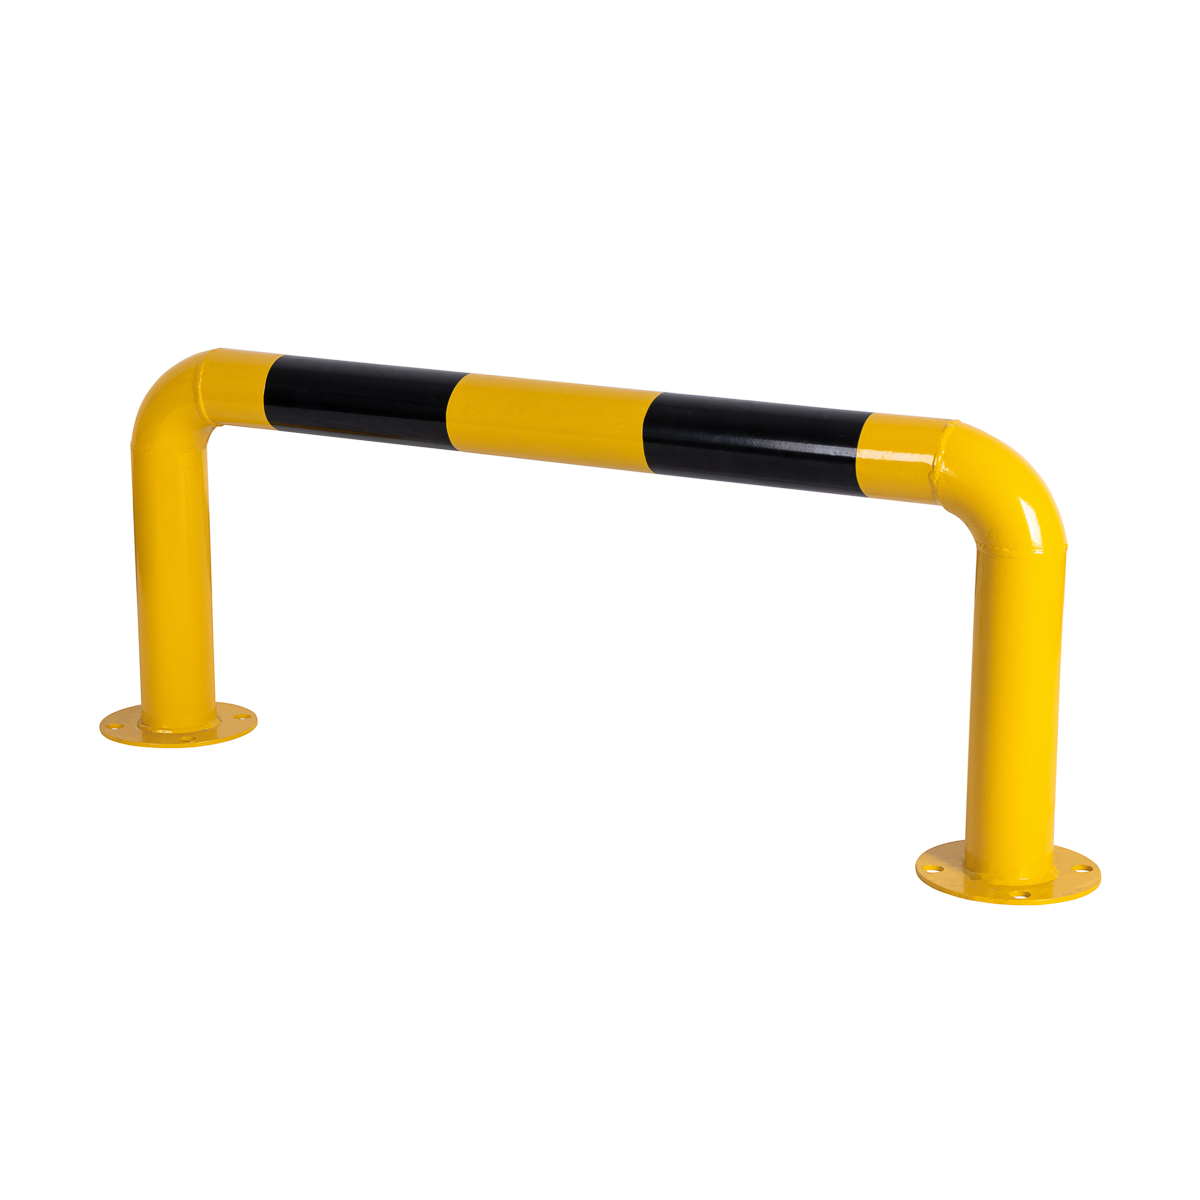 Steel U Post Barrier 1000mm | Black and Yellow |